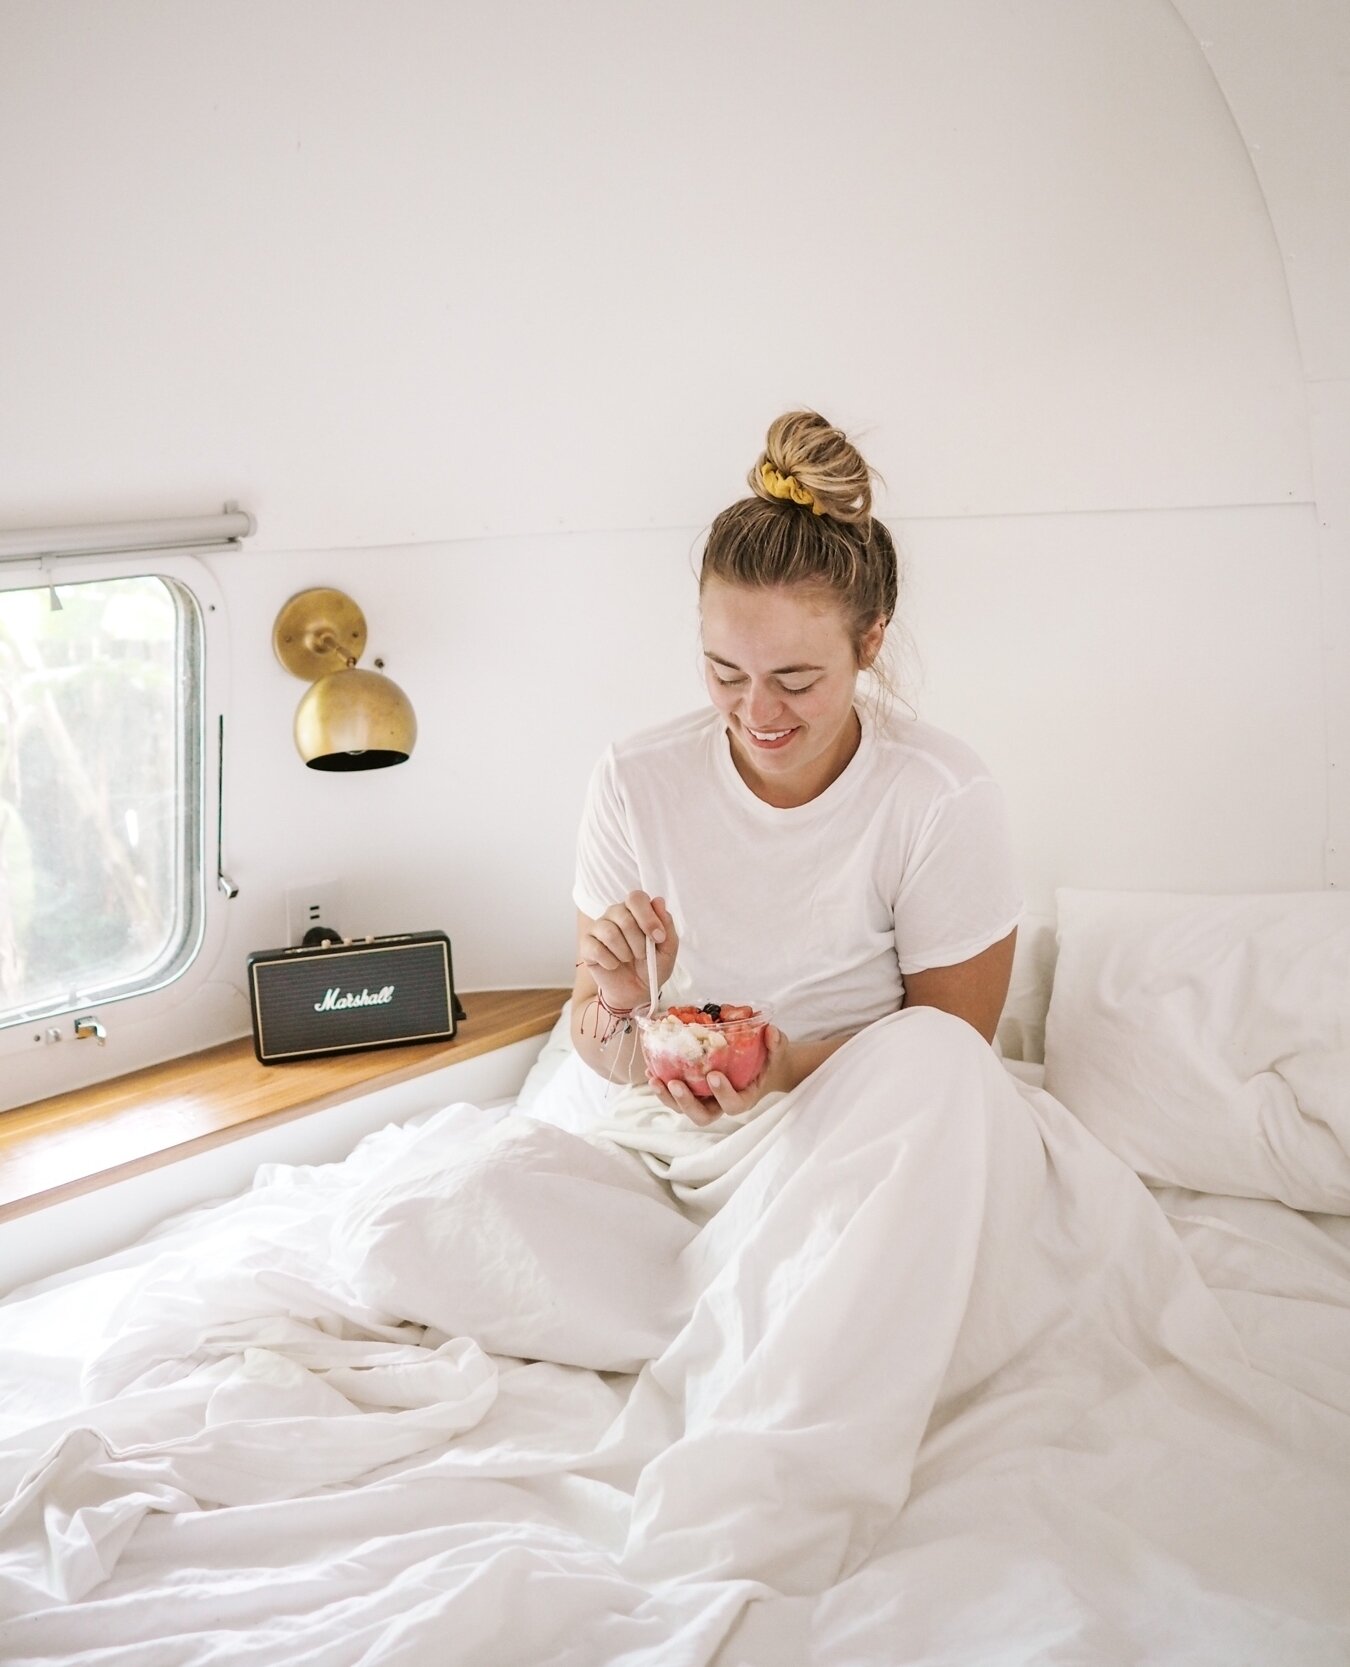 Mornings spent with no to-do list 😌 Be like @meg_ward_ and grab a smoothie bowl from @gojuice down the street and bring it back to the Airstreams to enjoy somewhere cozy.